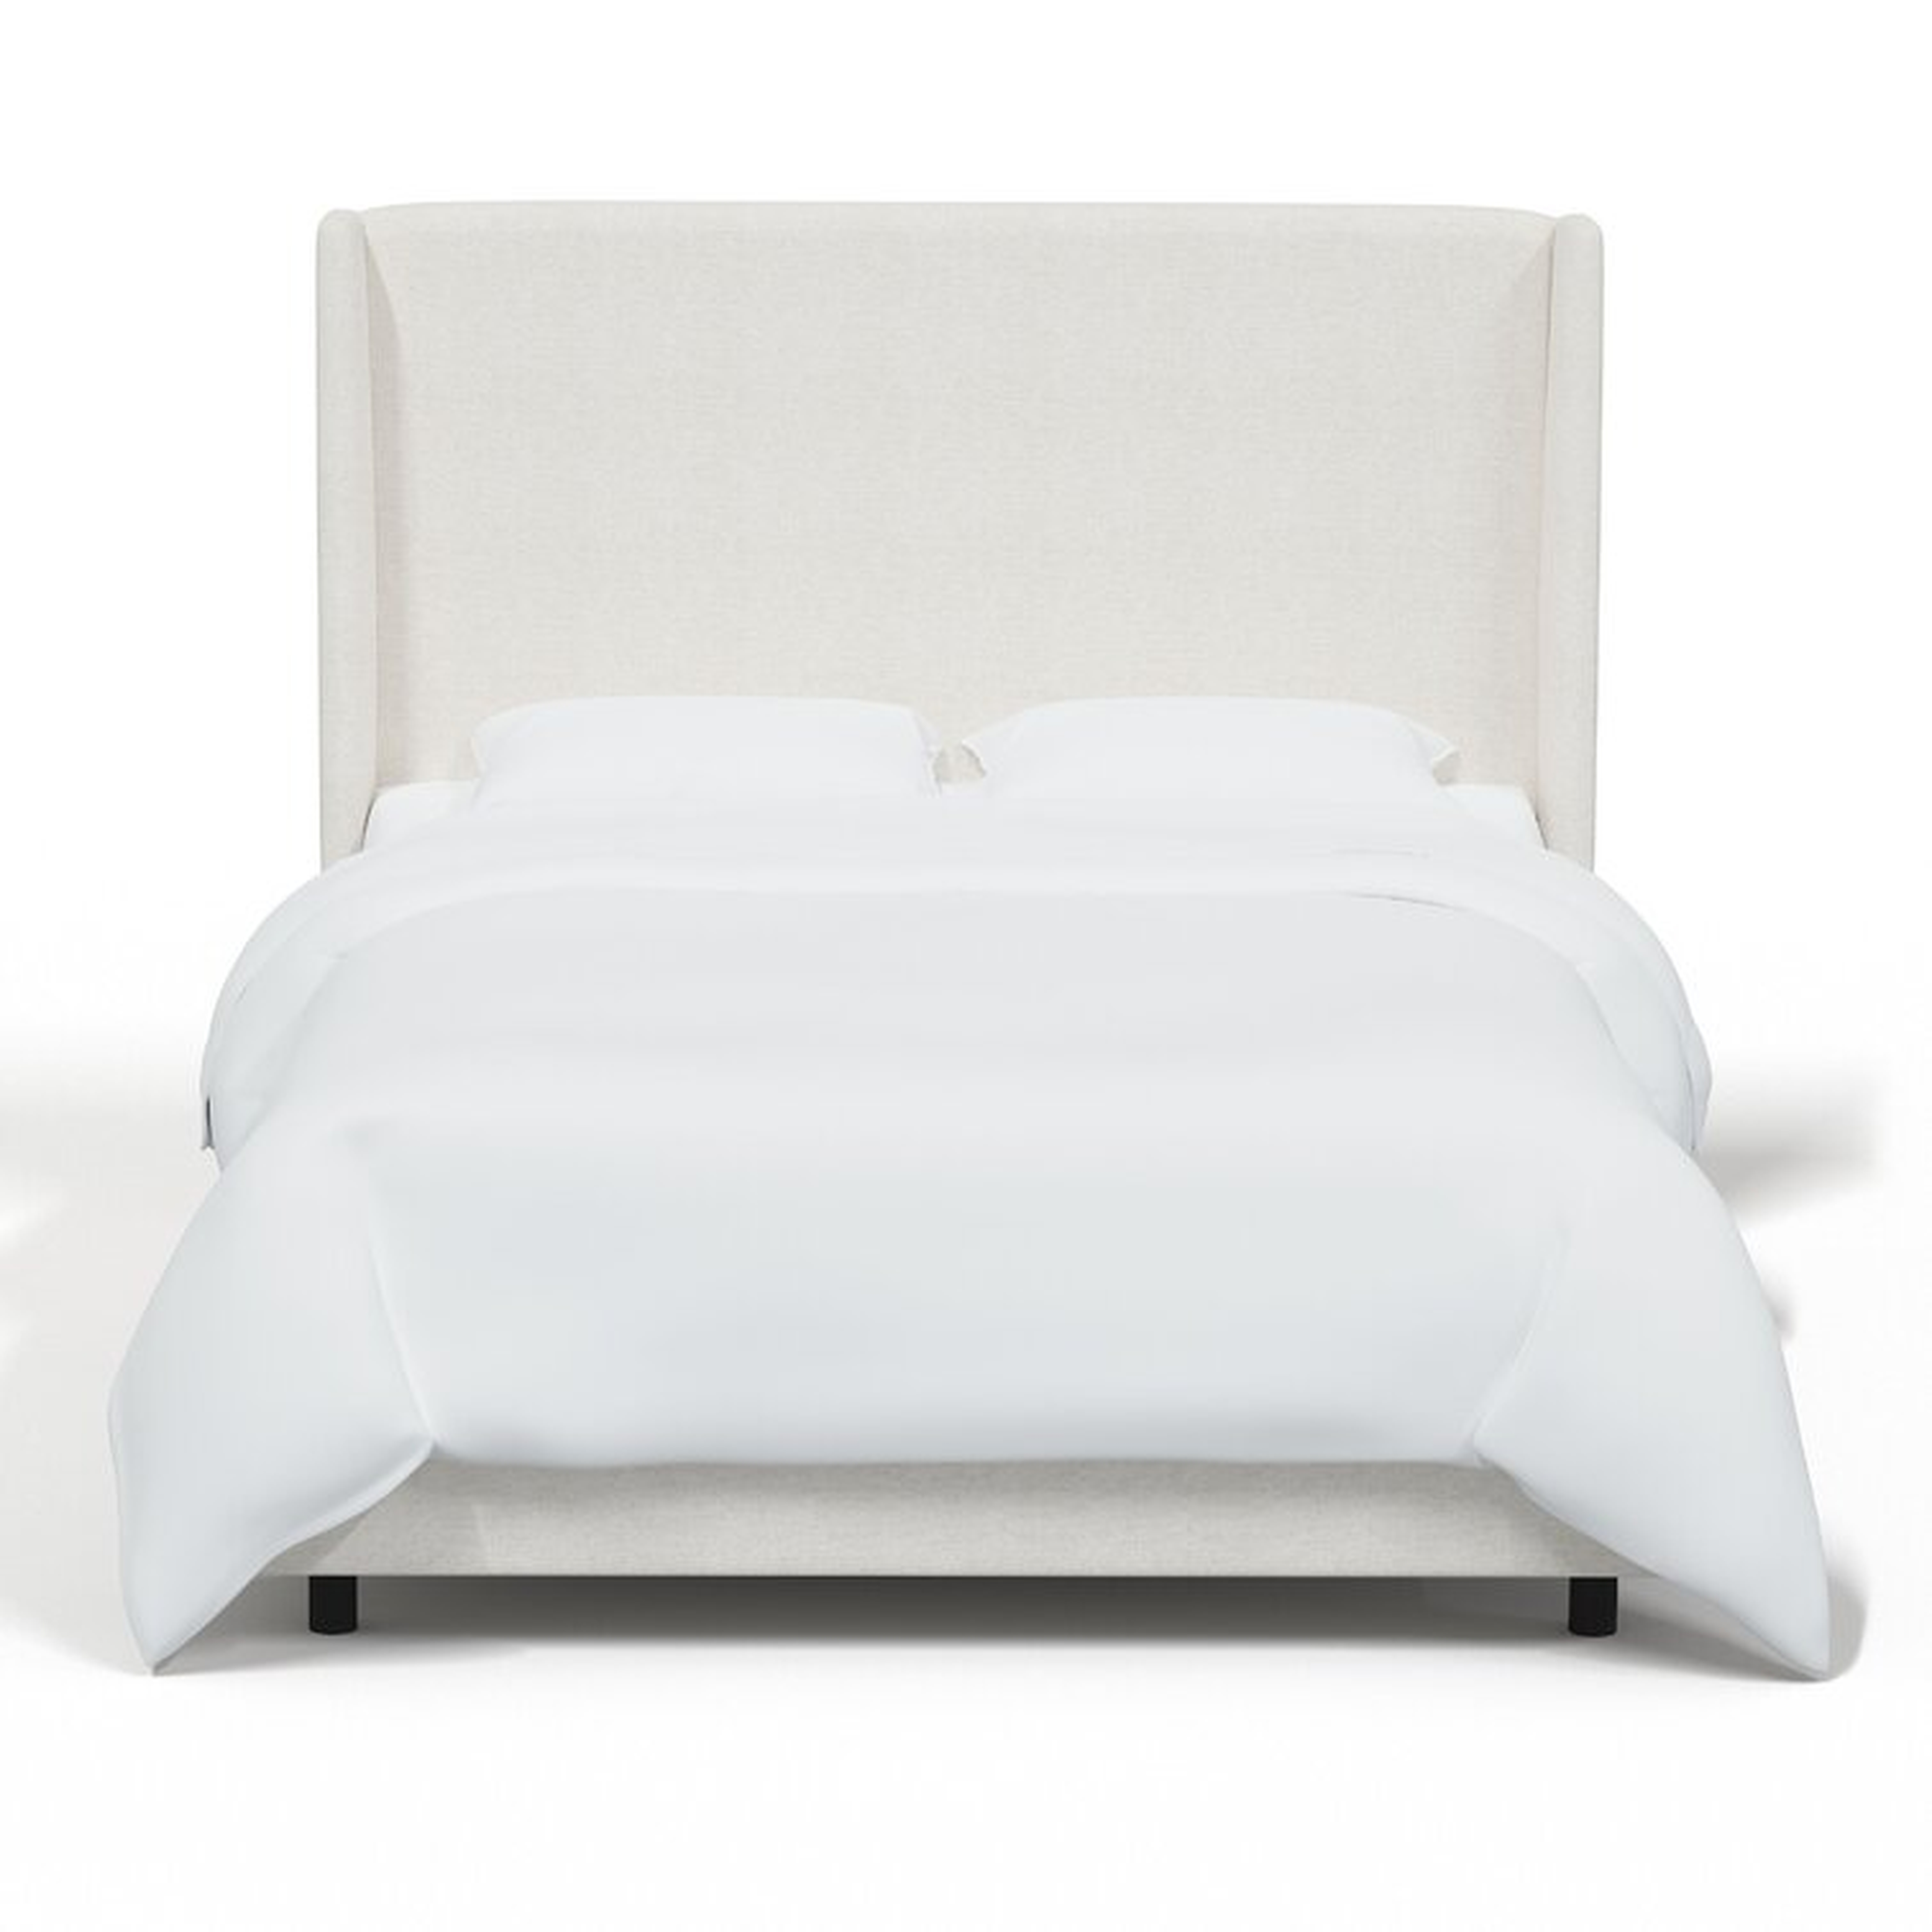 Tilly Upholstered Low Profile Queen Bed, White Performance - Wayfair